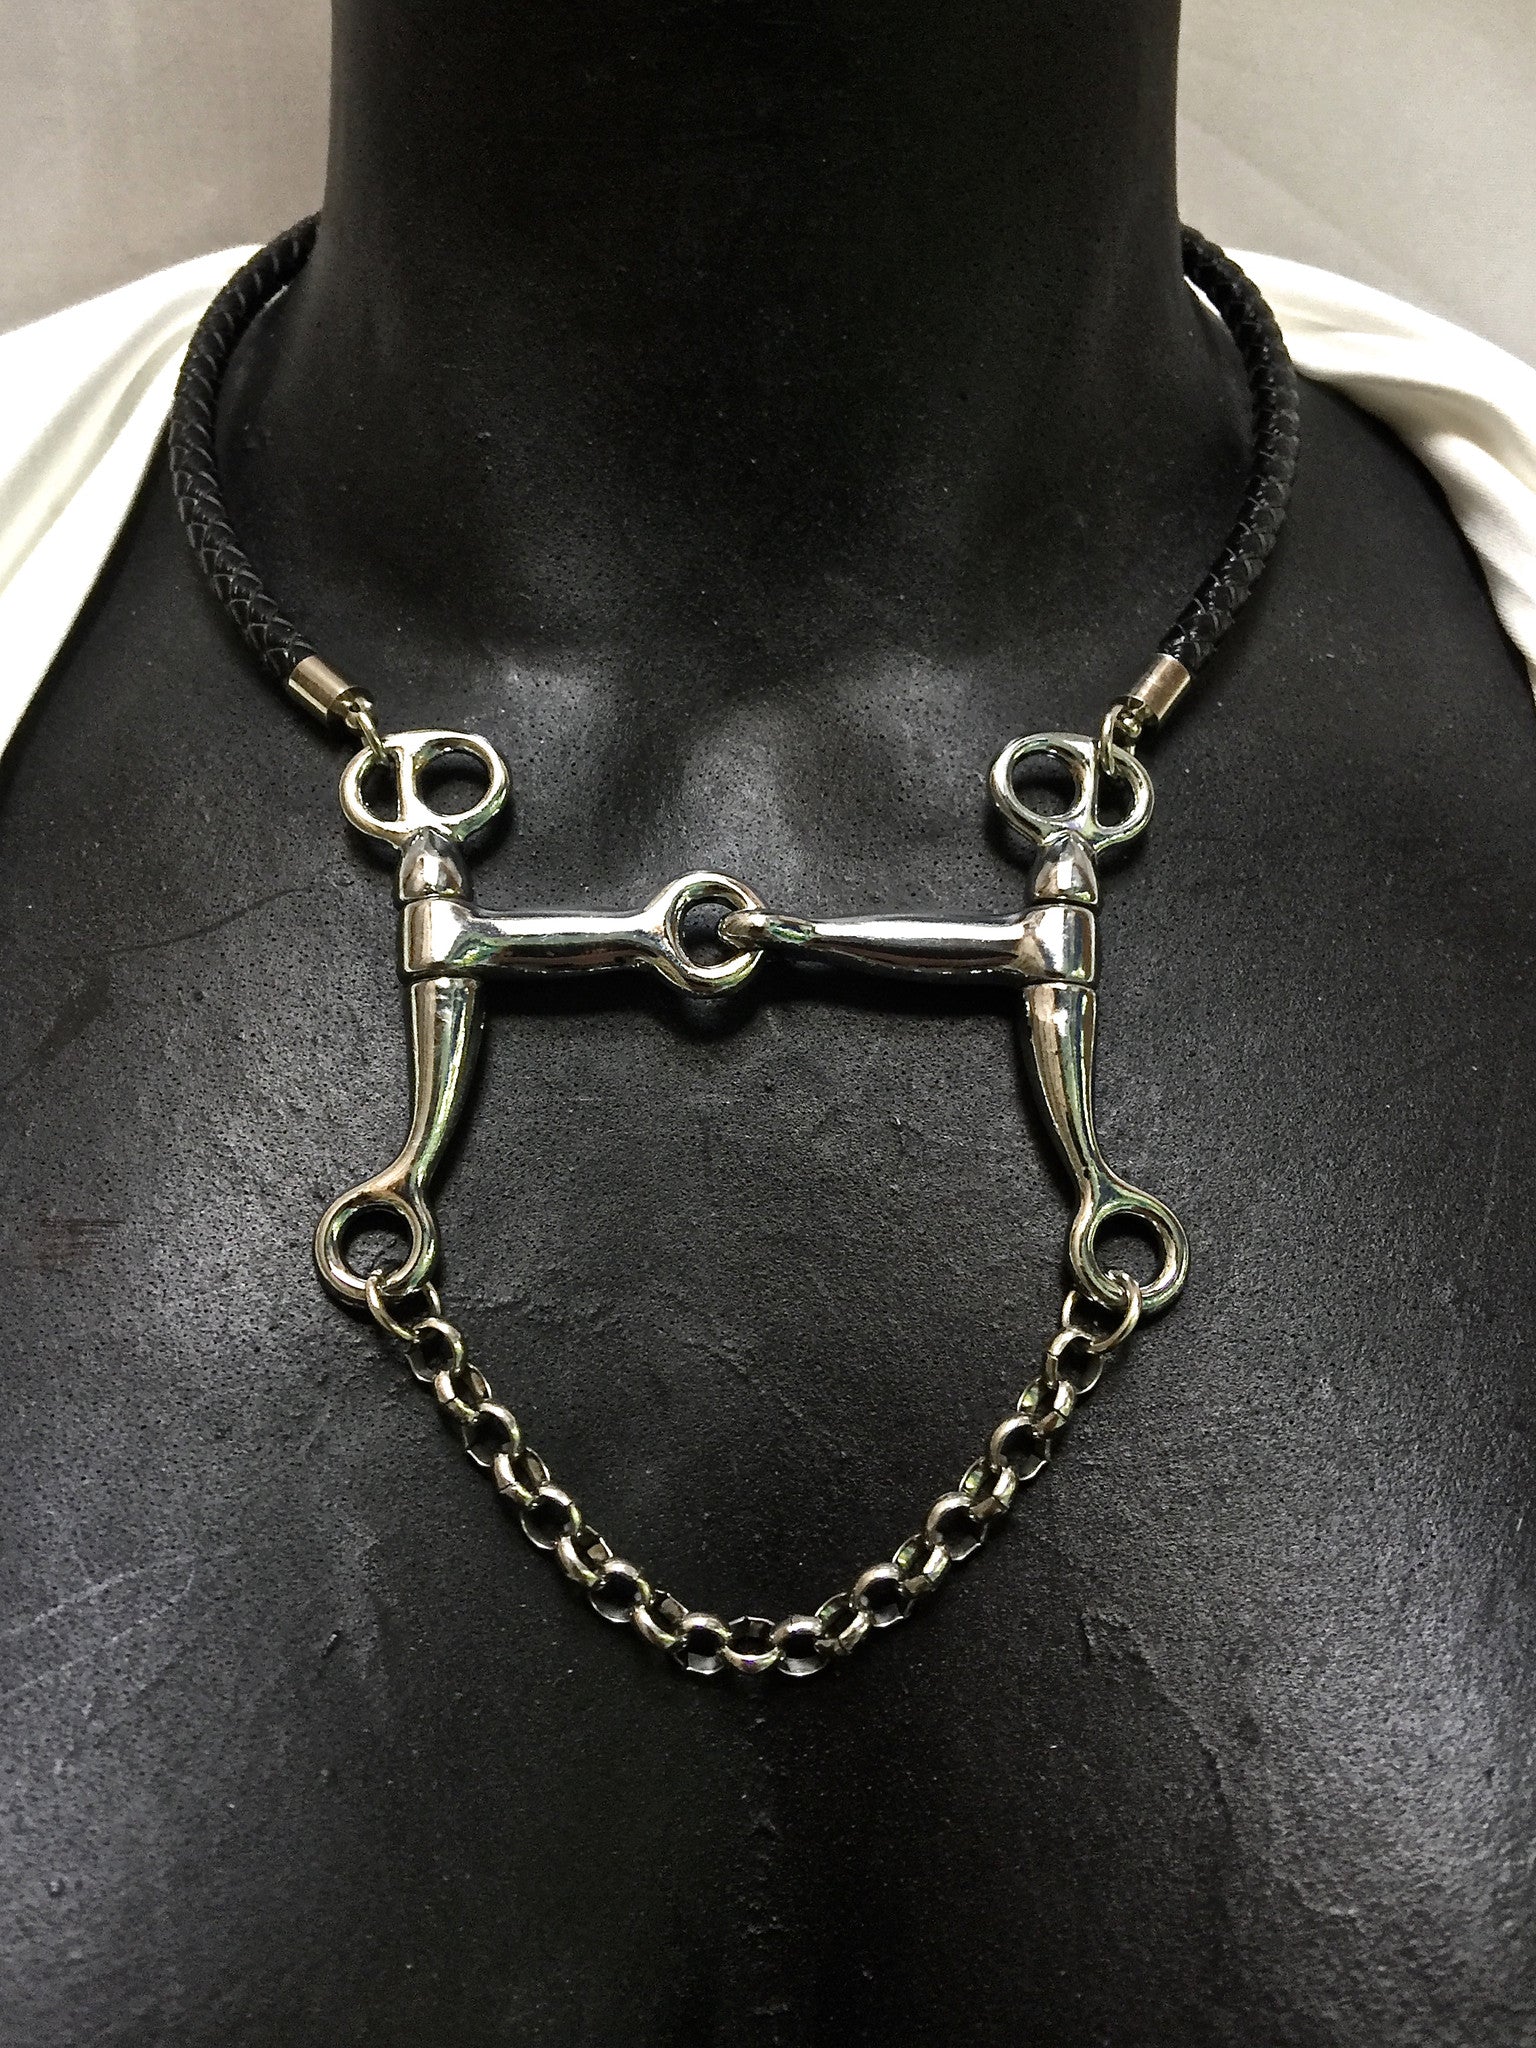 5 MM ROUND BRAIDED LEATHER NECKLACE WITH PELHAM HORSE BIT PENDANT AND CHAIN CLOSE UP